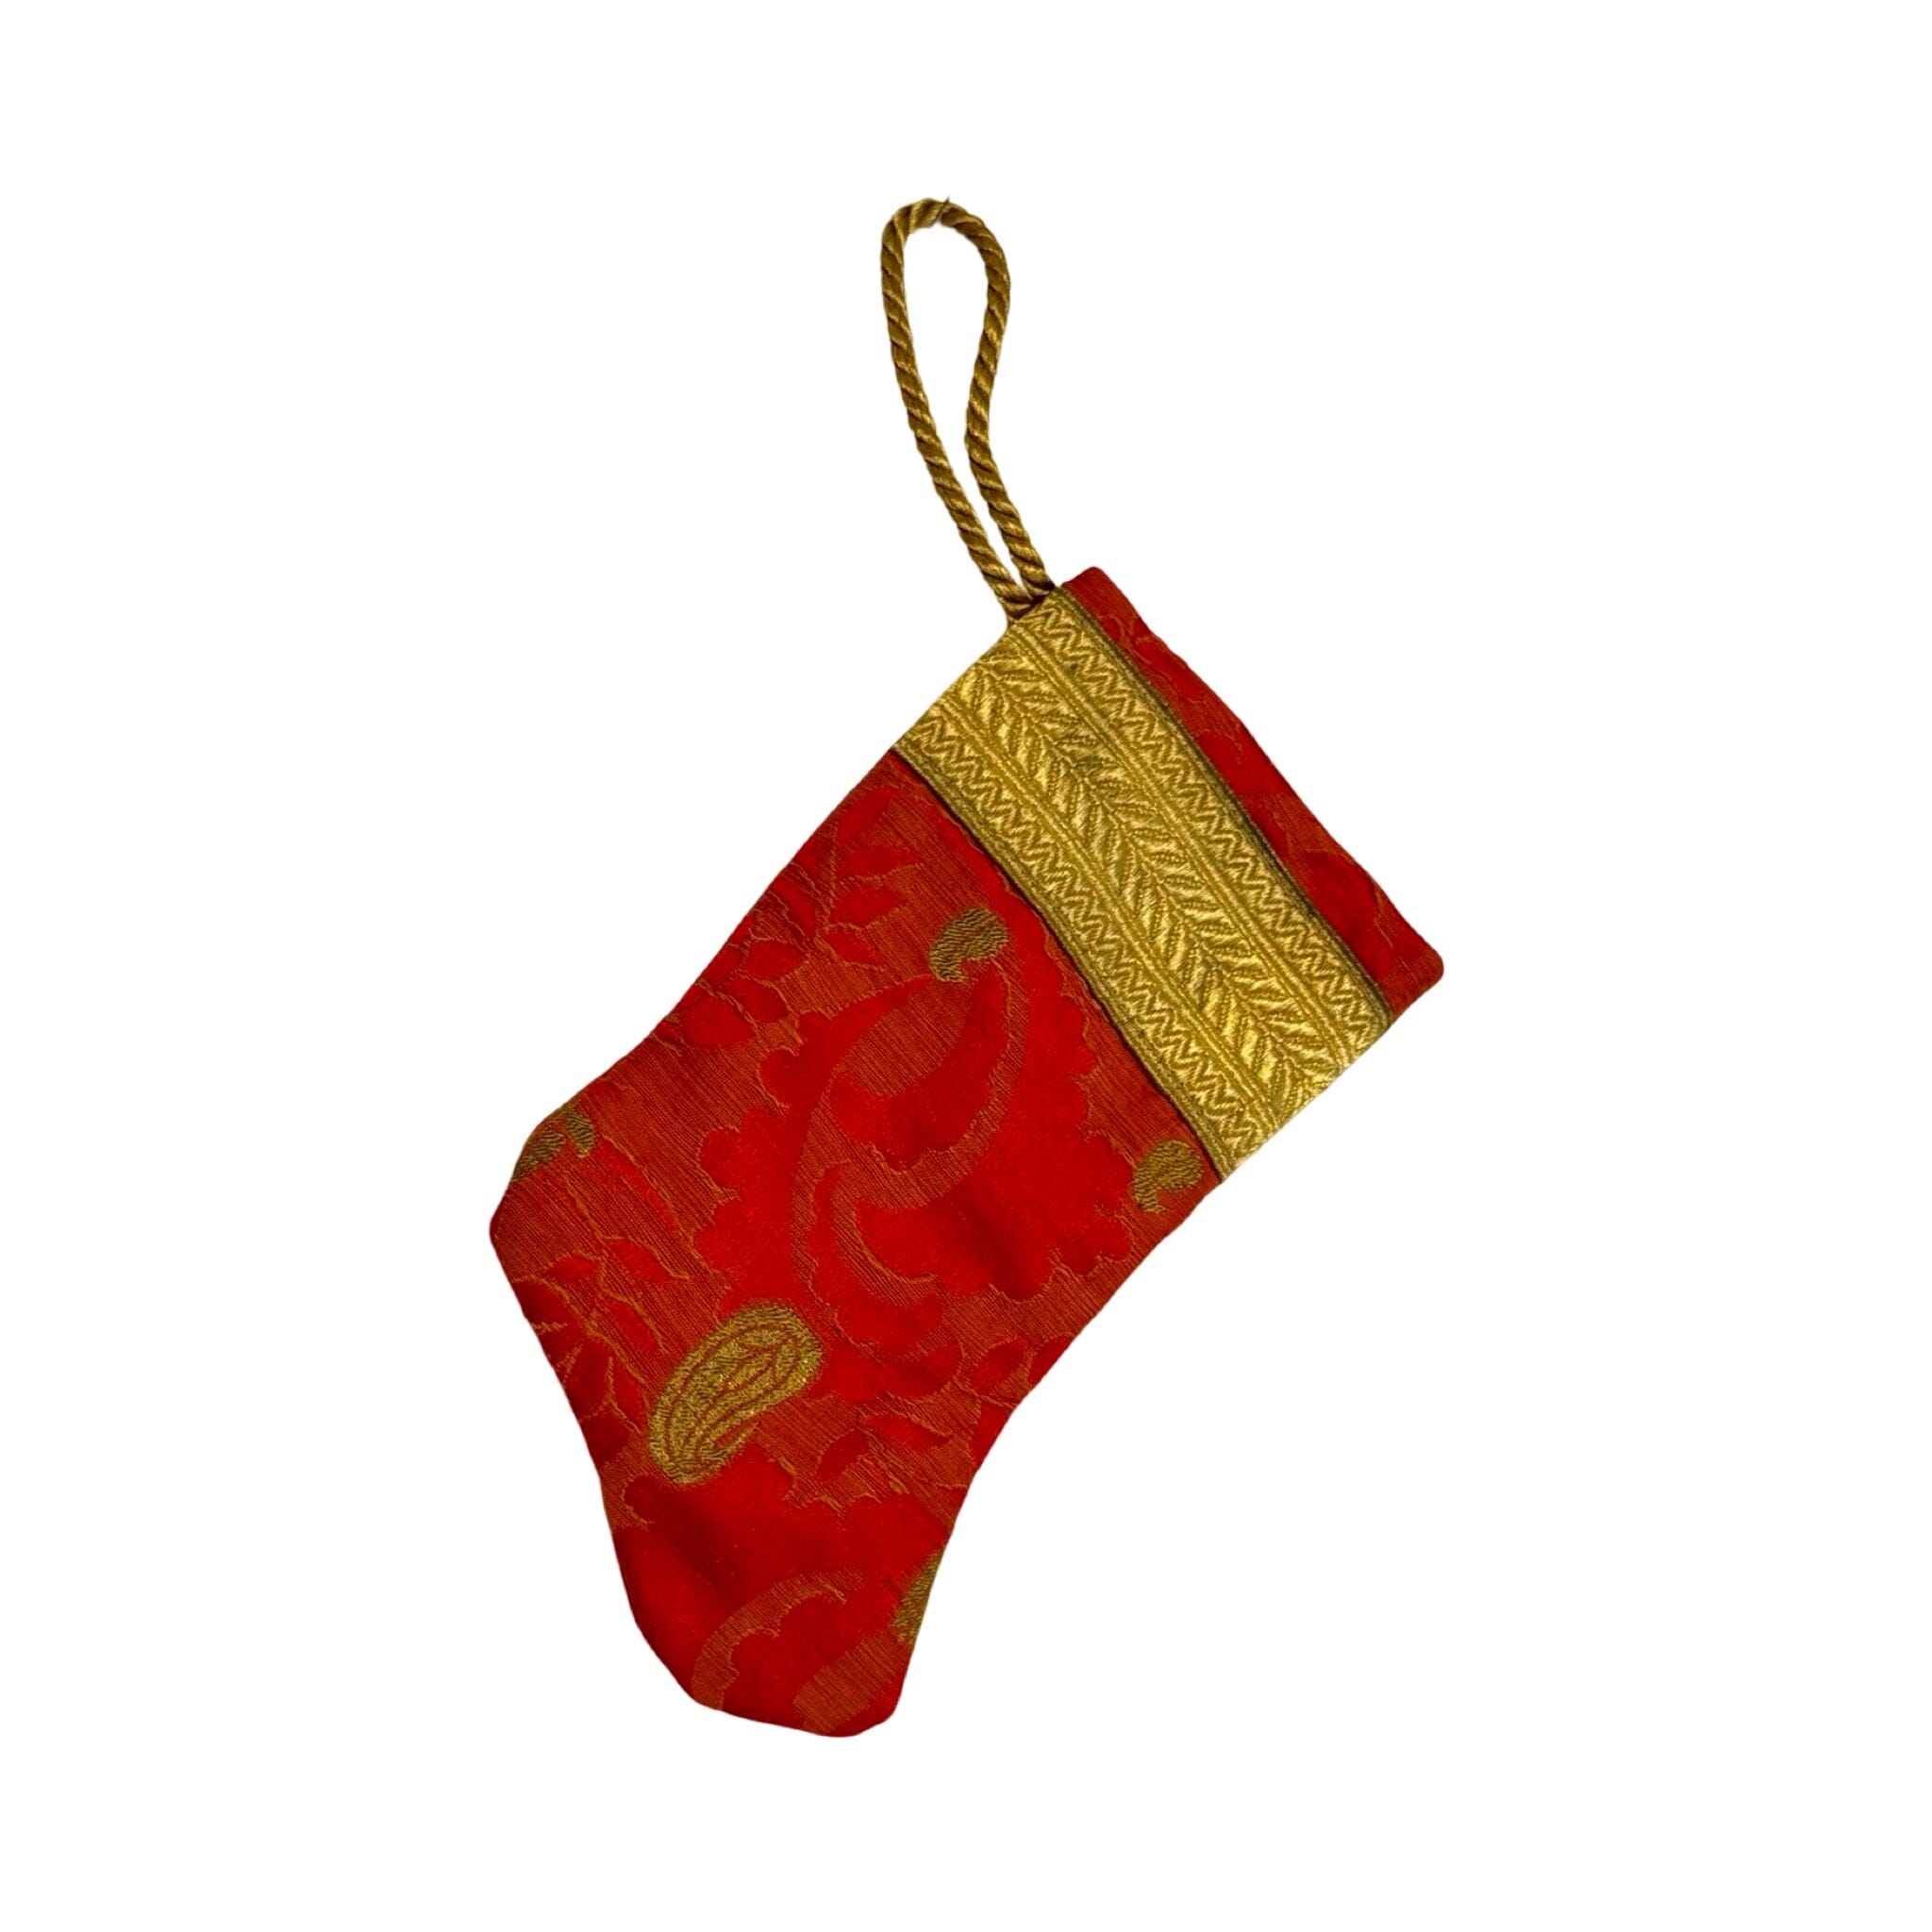 Handmade Mini Stocking Made From Vintage Fabric and Trims- Red and Gold Ornament B. Viz Design D 